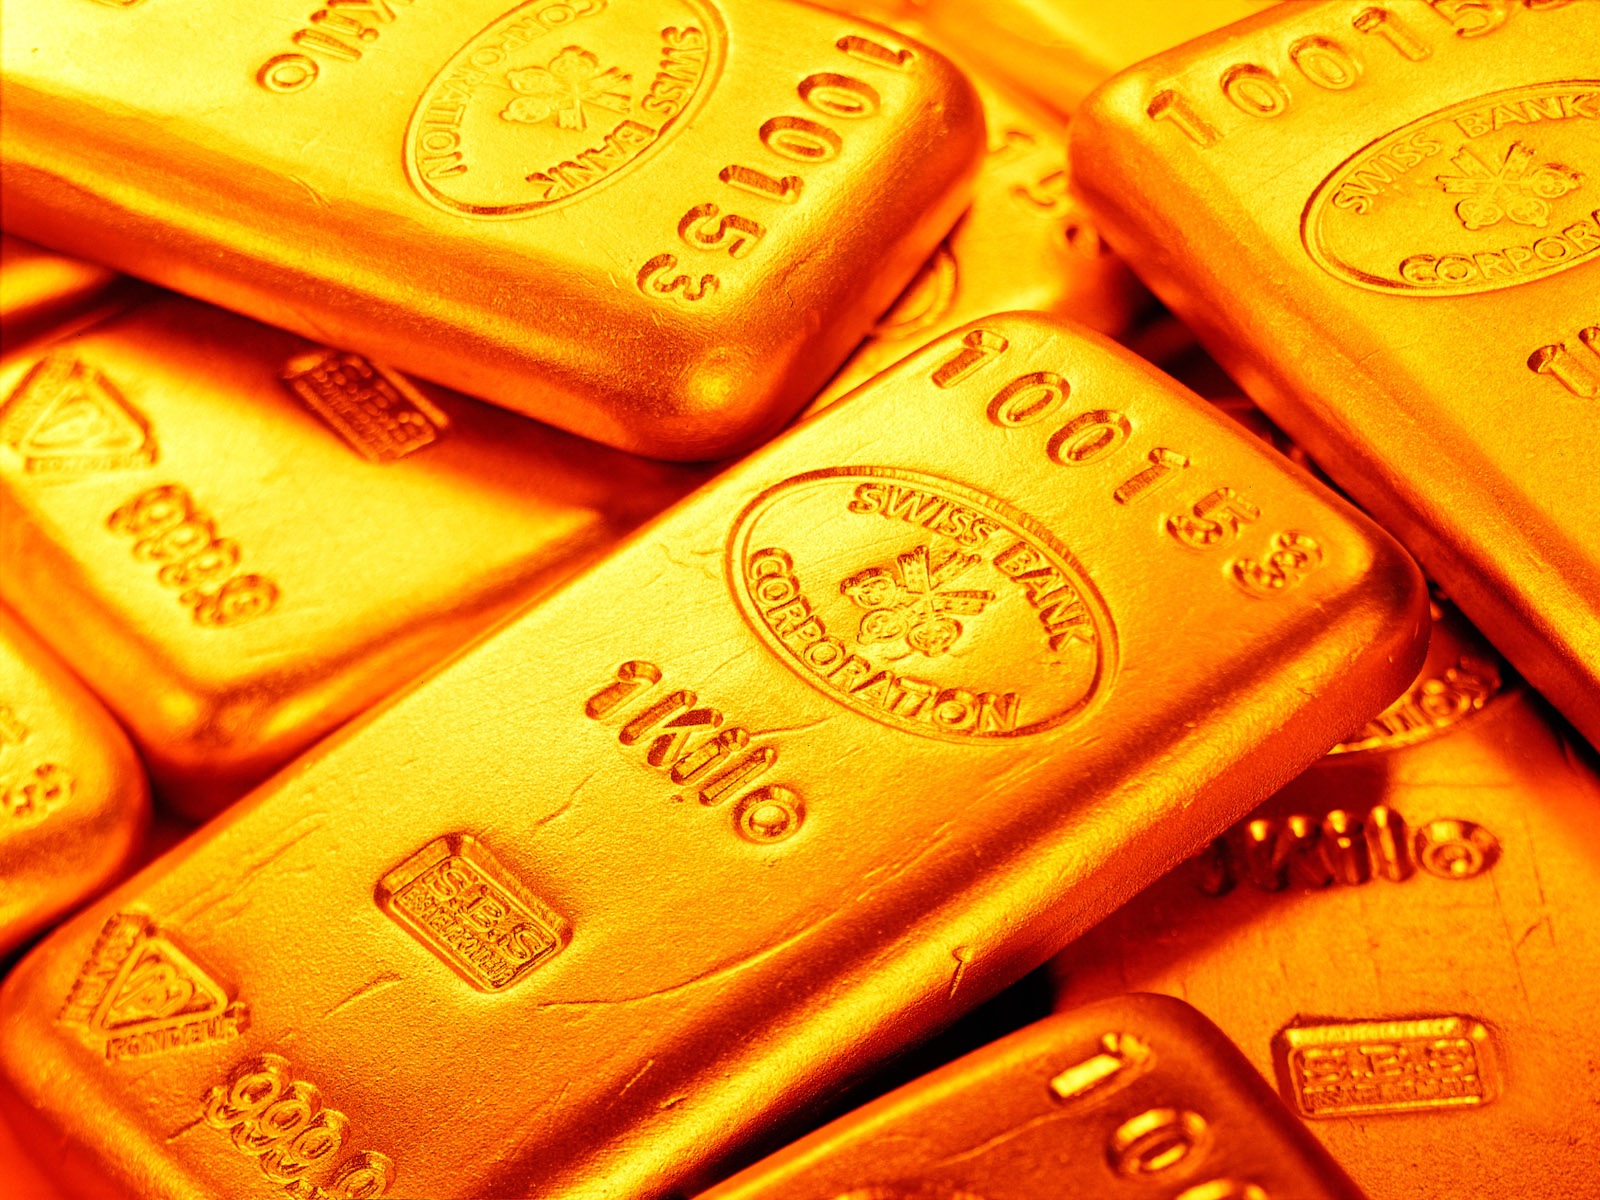 Previous, The financial crisis Wallpaper - Gold - One kilogram of pure gold 